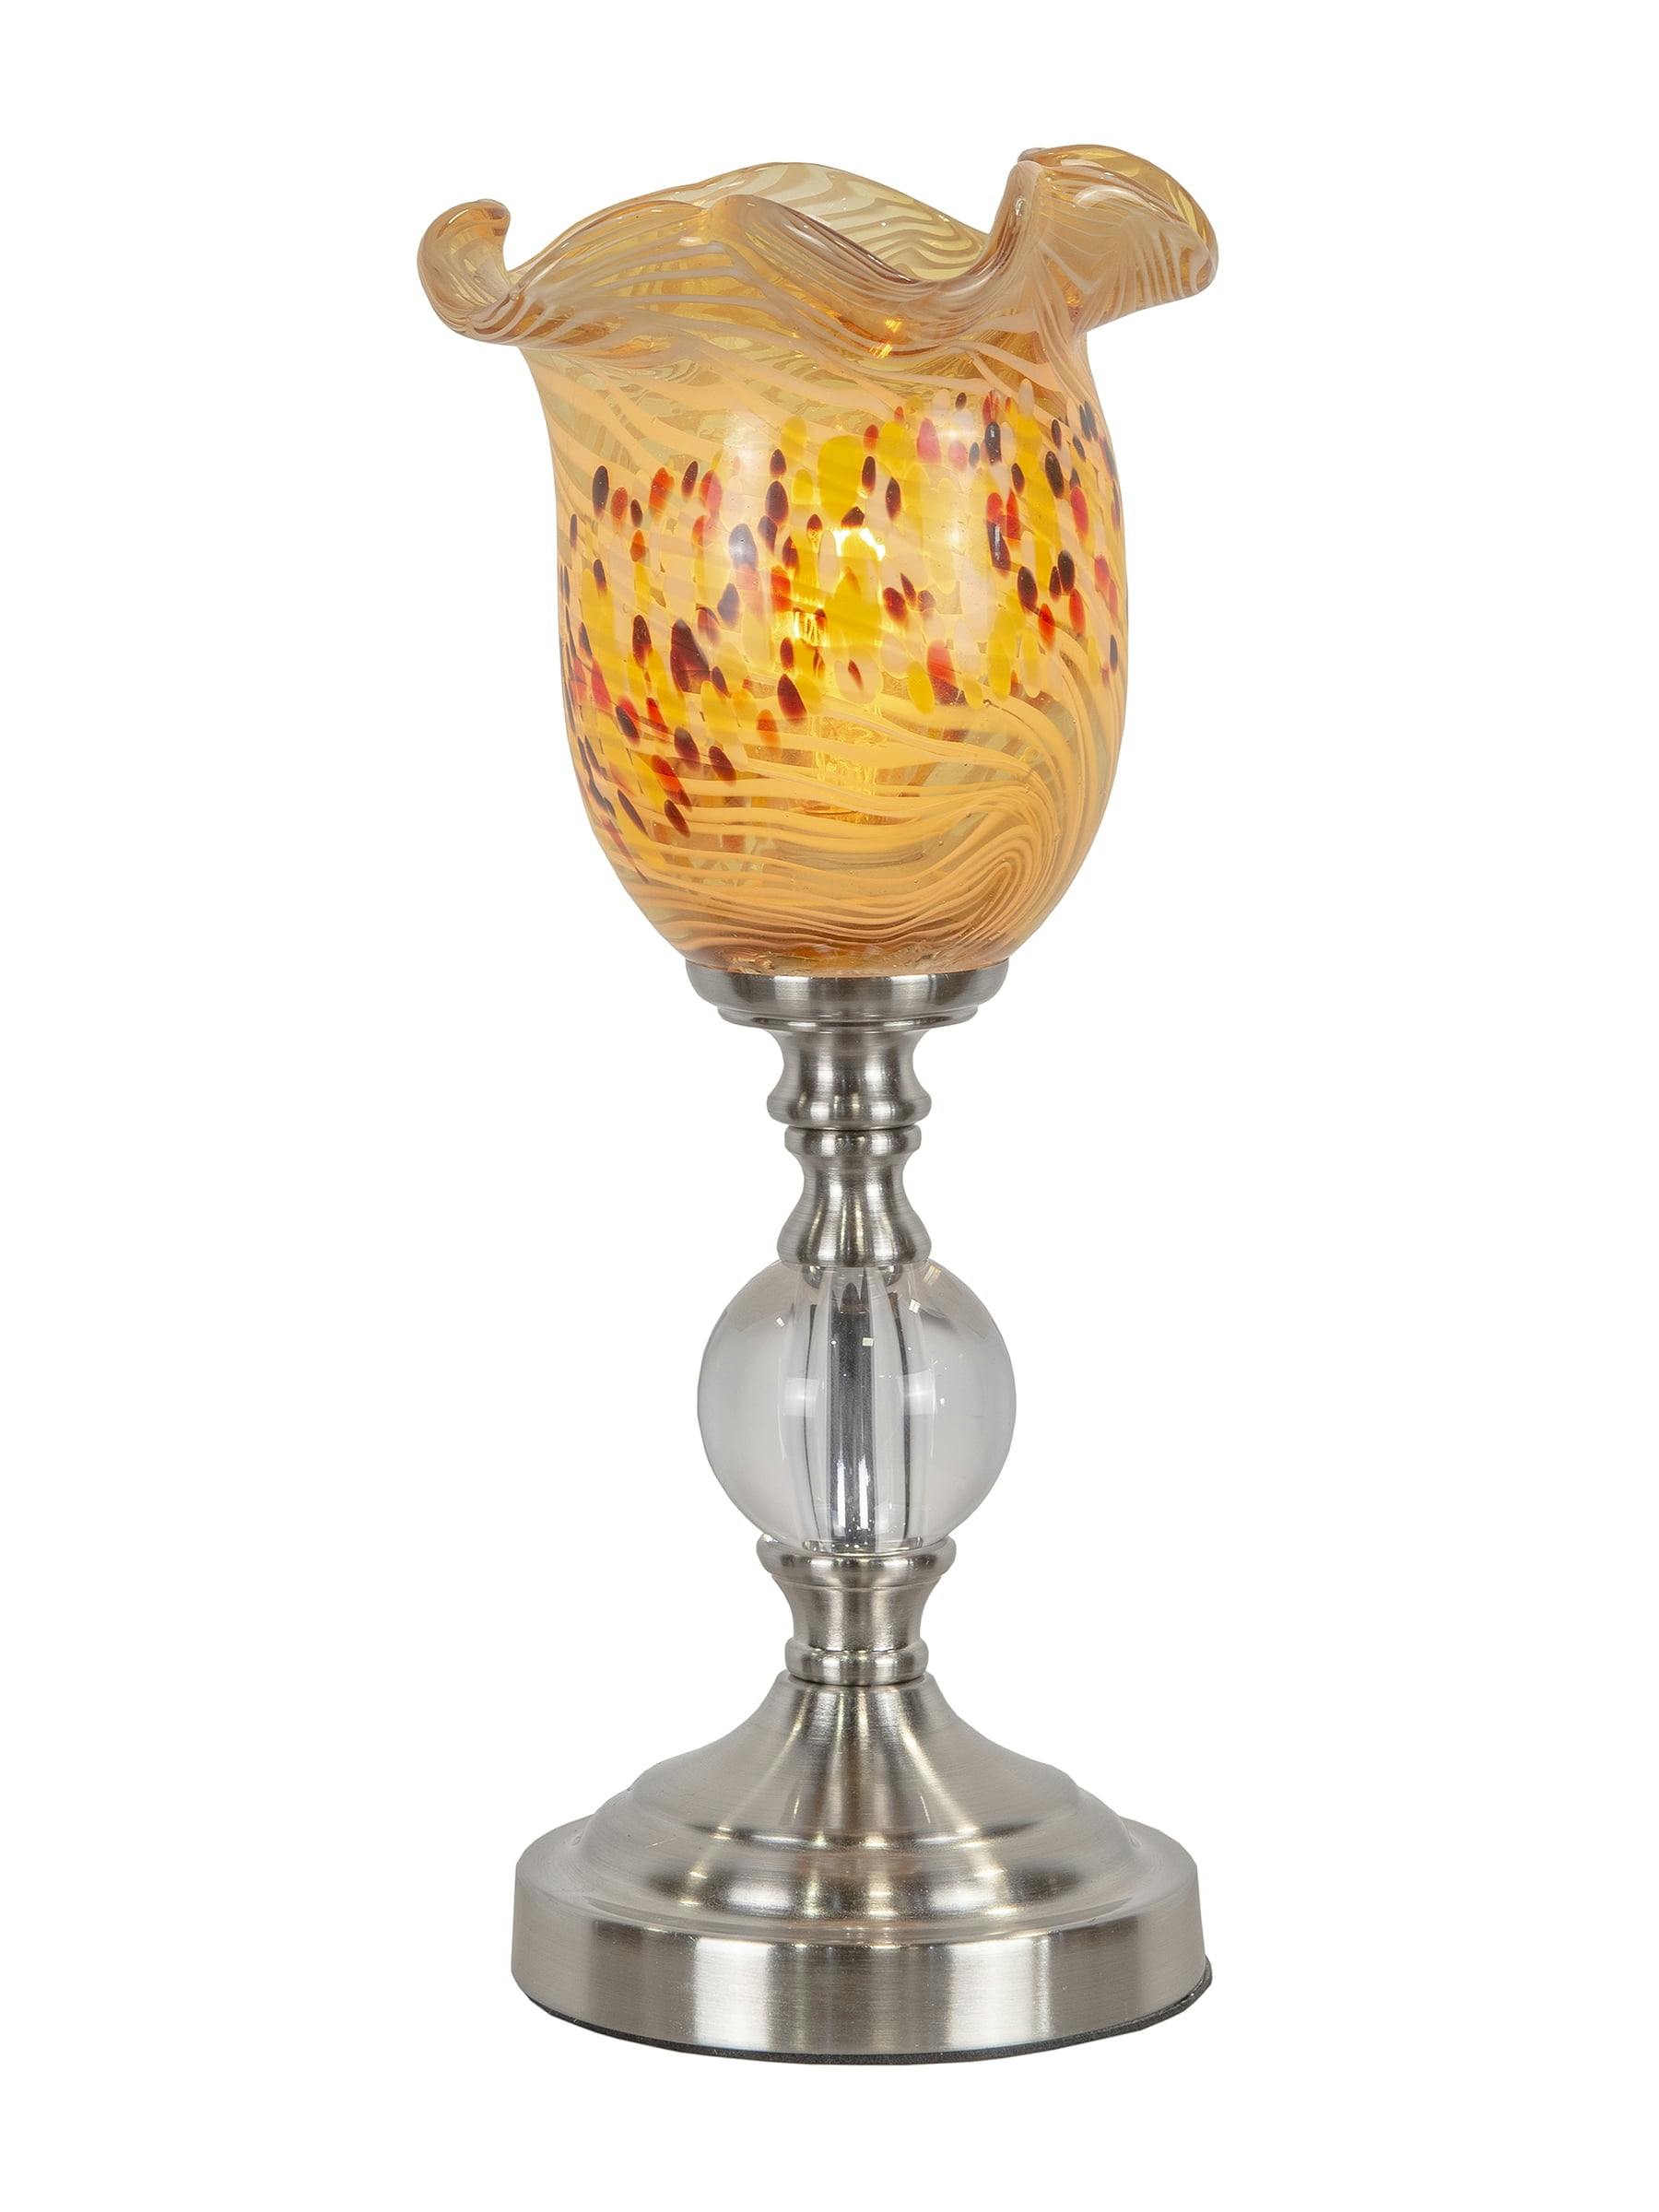 Amber Speckle 13" Hand-Blown Glass Torchiere-Style Accent Lamp